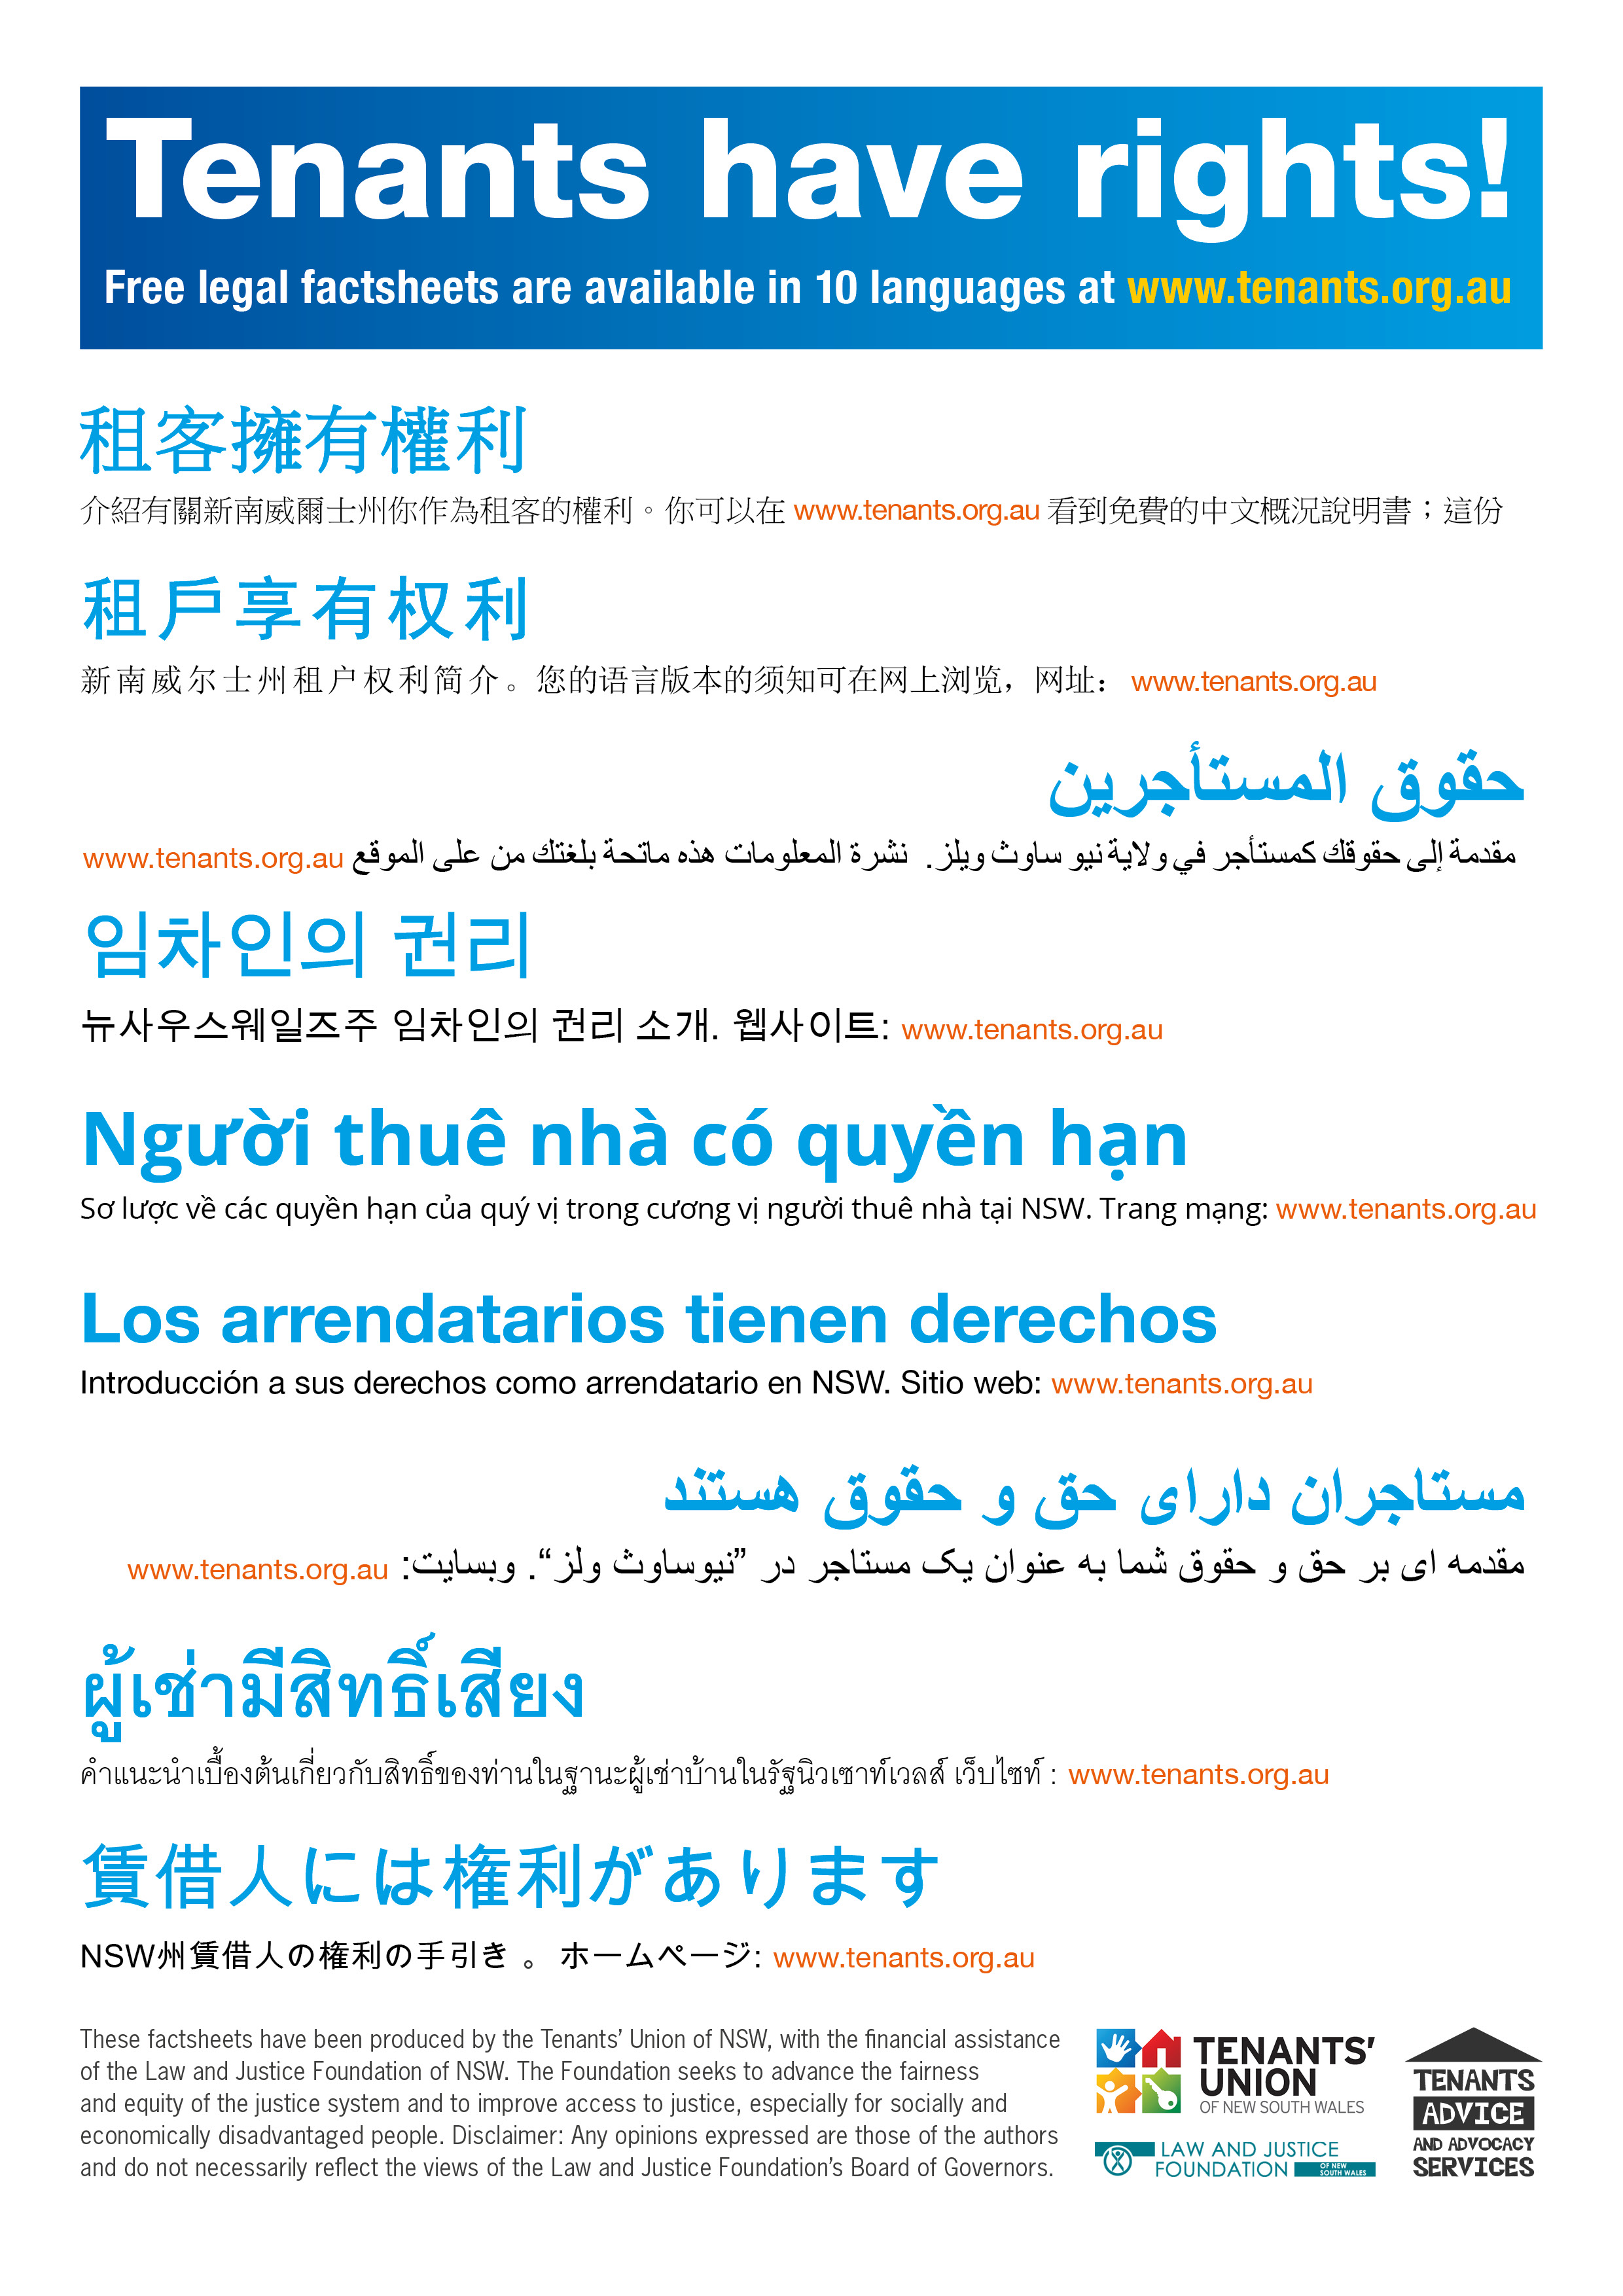 Tenants' have rights! Community languages poster